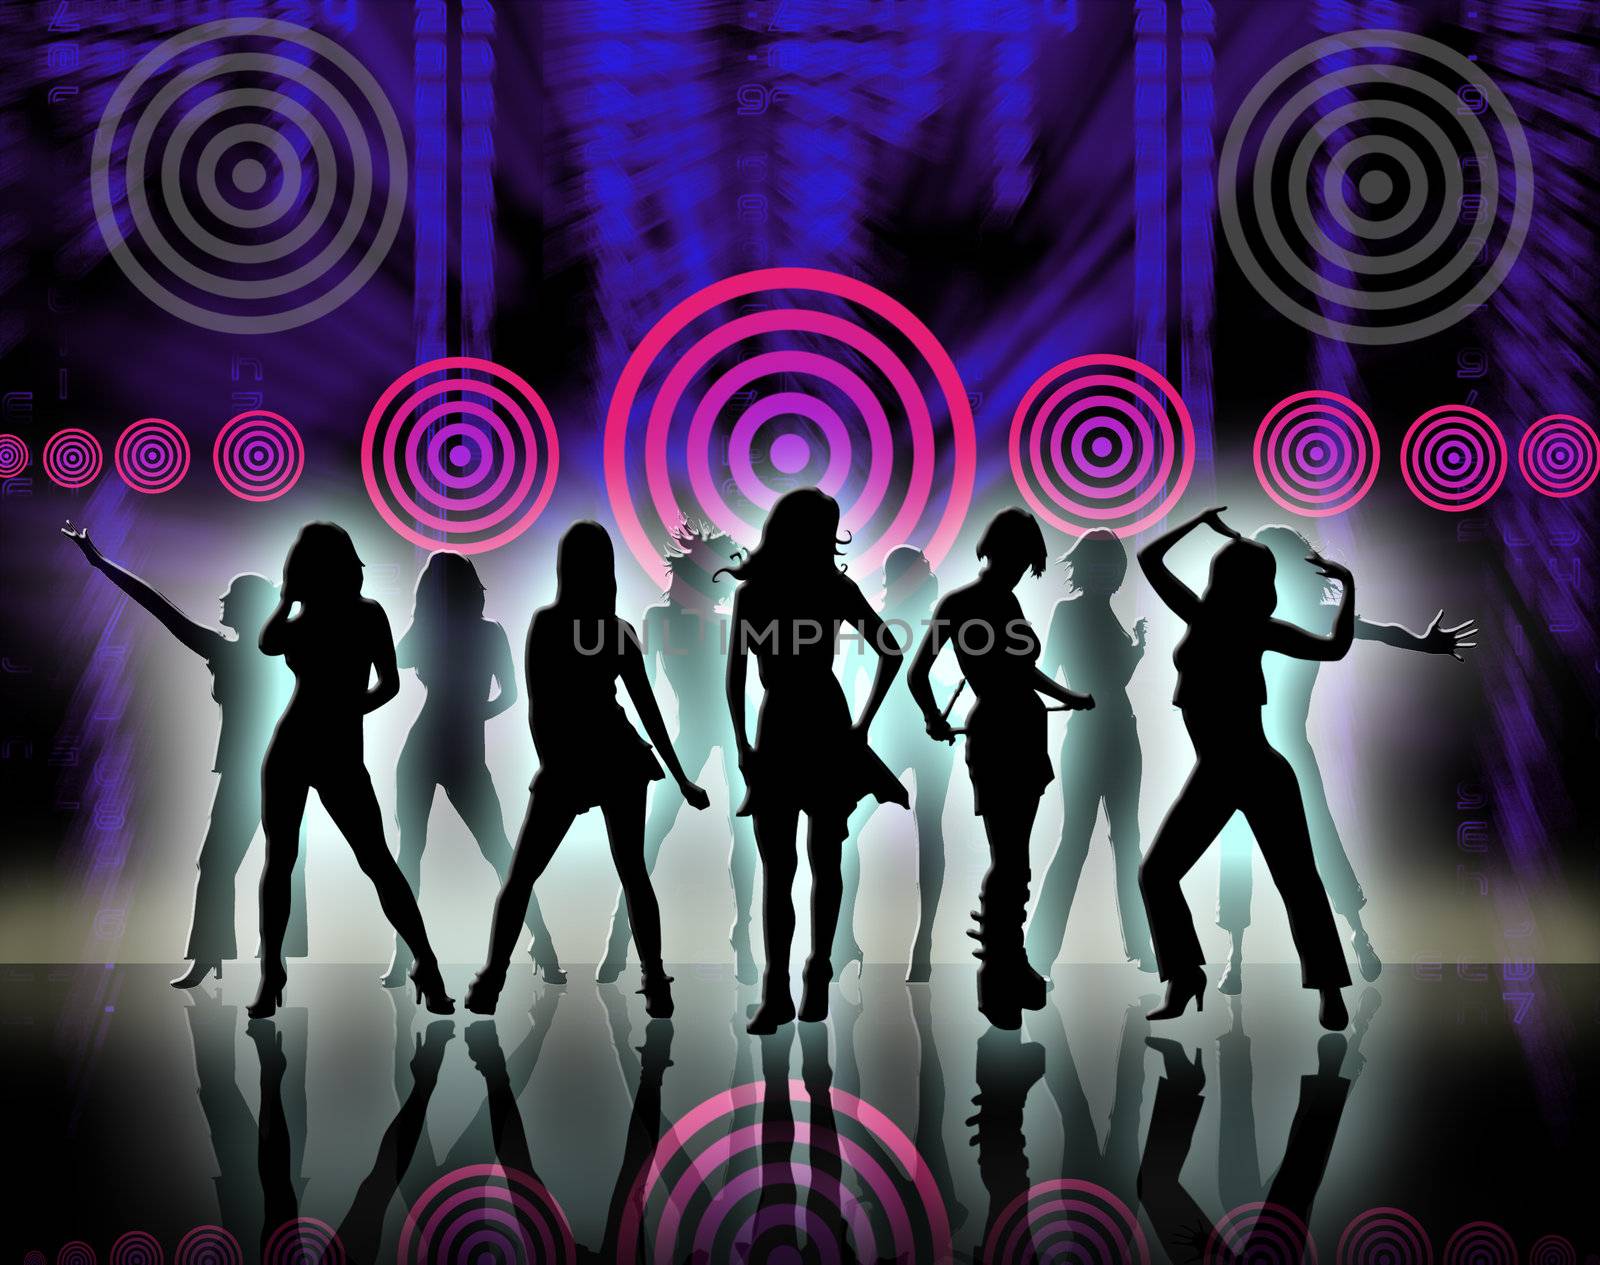 Silhouettes of pretty women dancing over abstract background